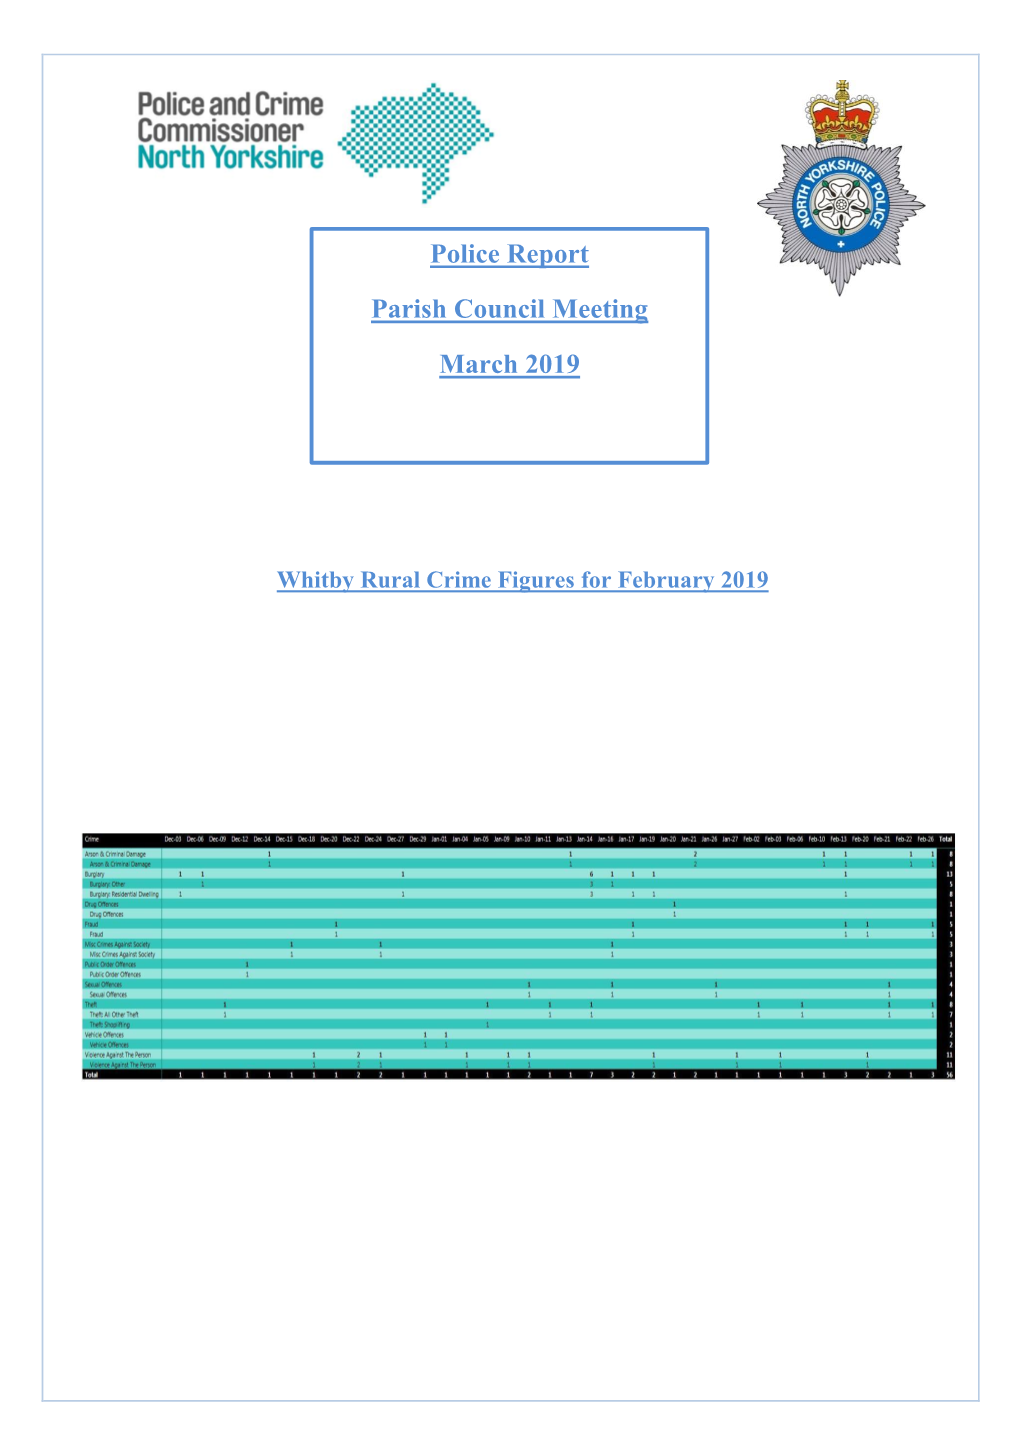 March 2019 Police Report